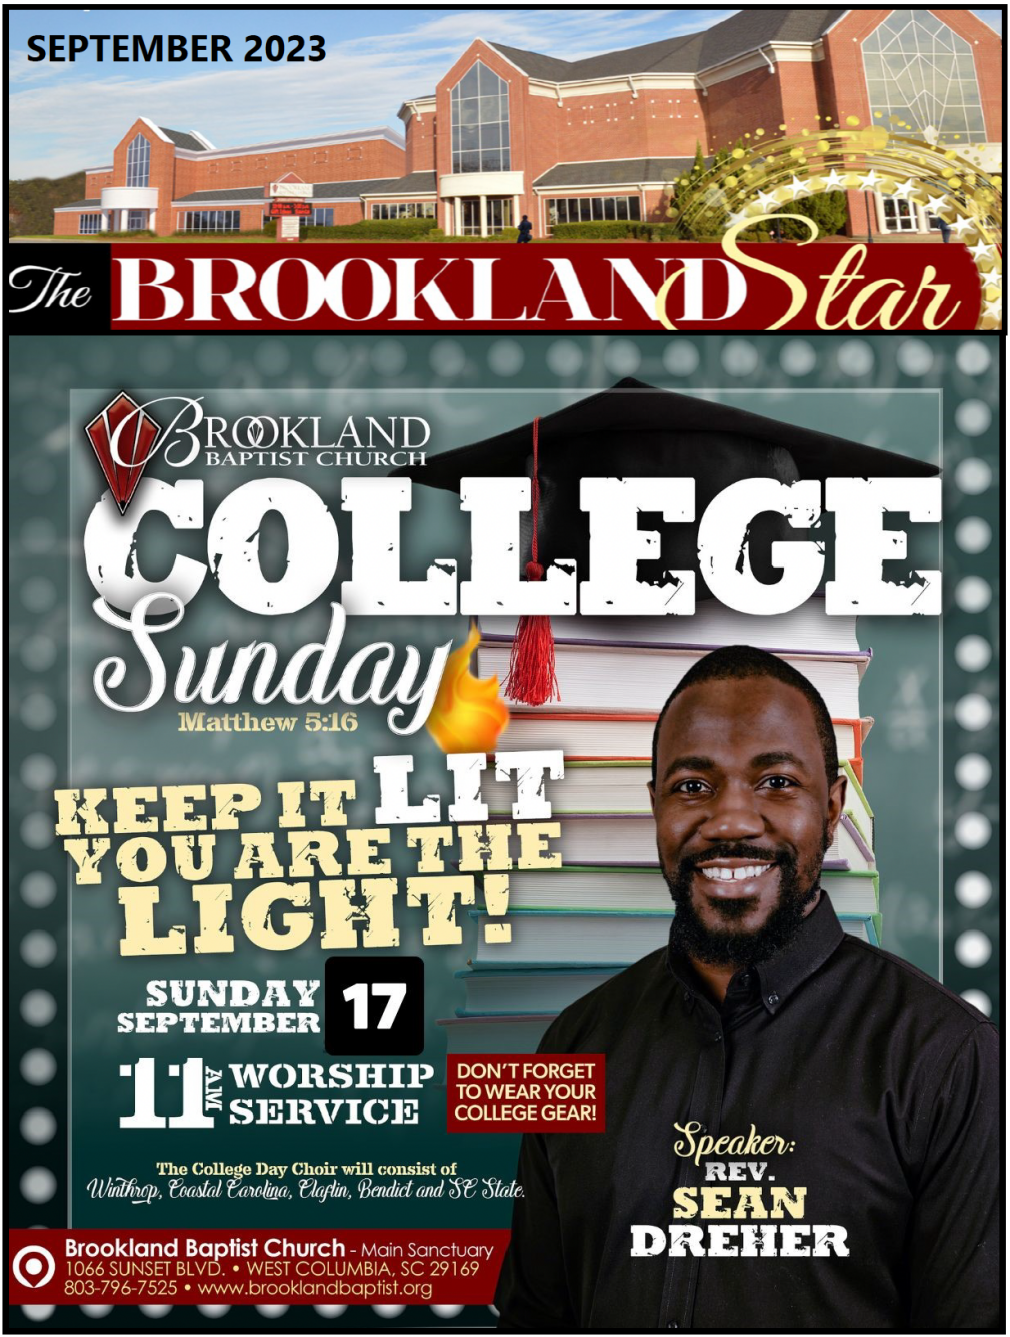 The Brookland Star September 2023 Edition